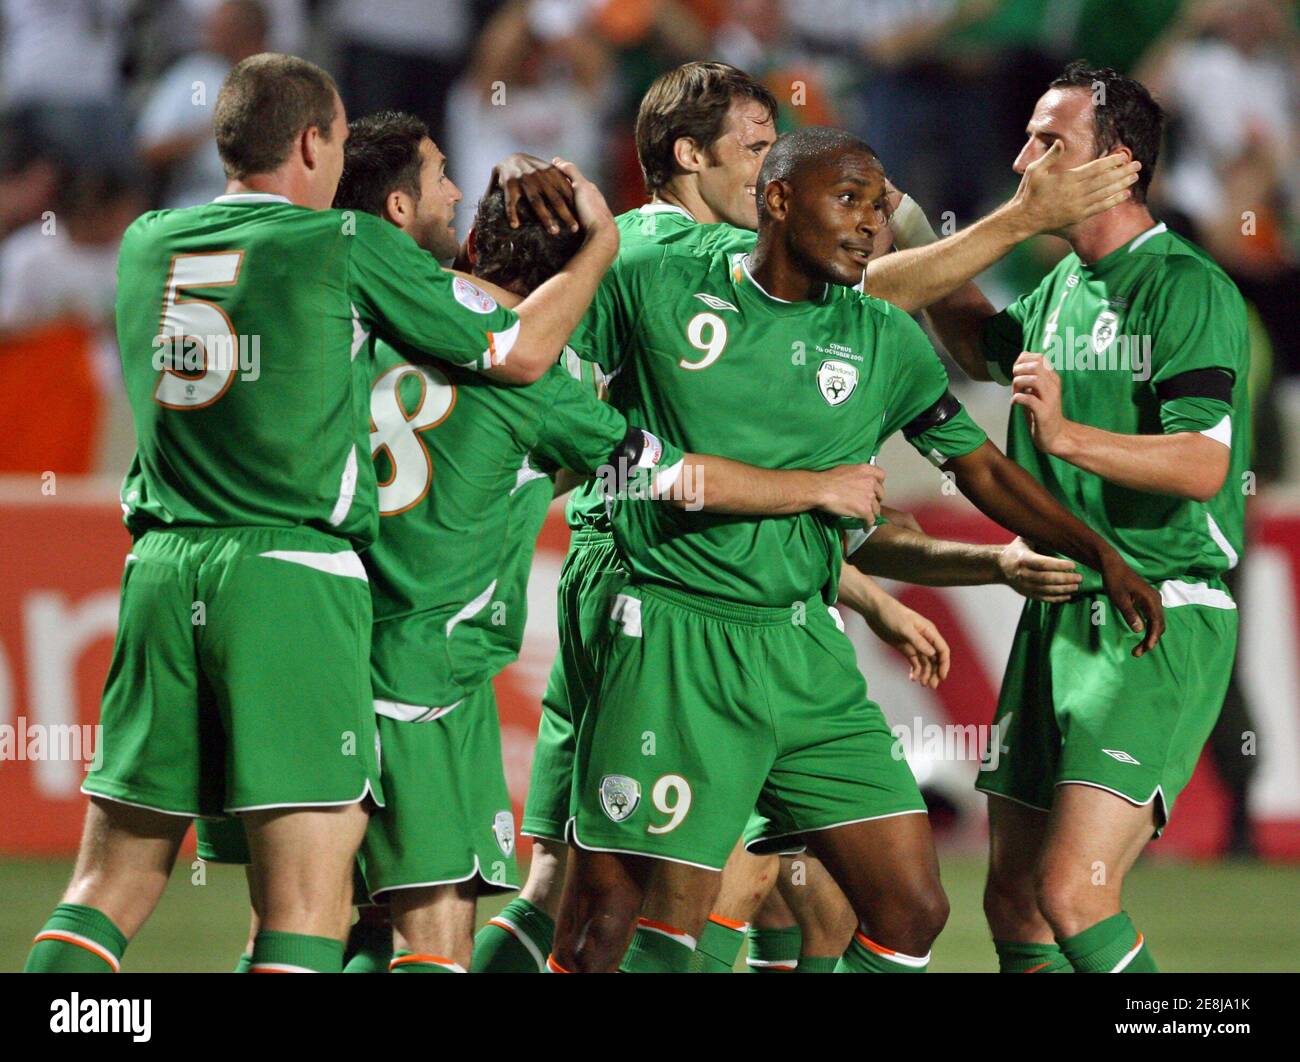 Ireland players celebrate their first goal against Cyprus during their Group D Euro 2008 qualifying soccer match in Nicosia October 7, 2006.   REUTERS/Oleg Popov     (CYPRUS) Stock Photo